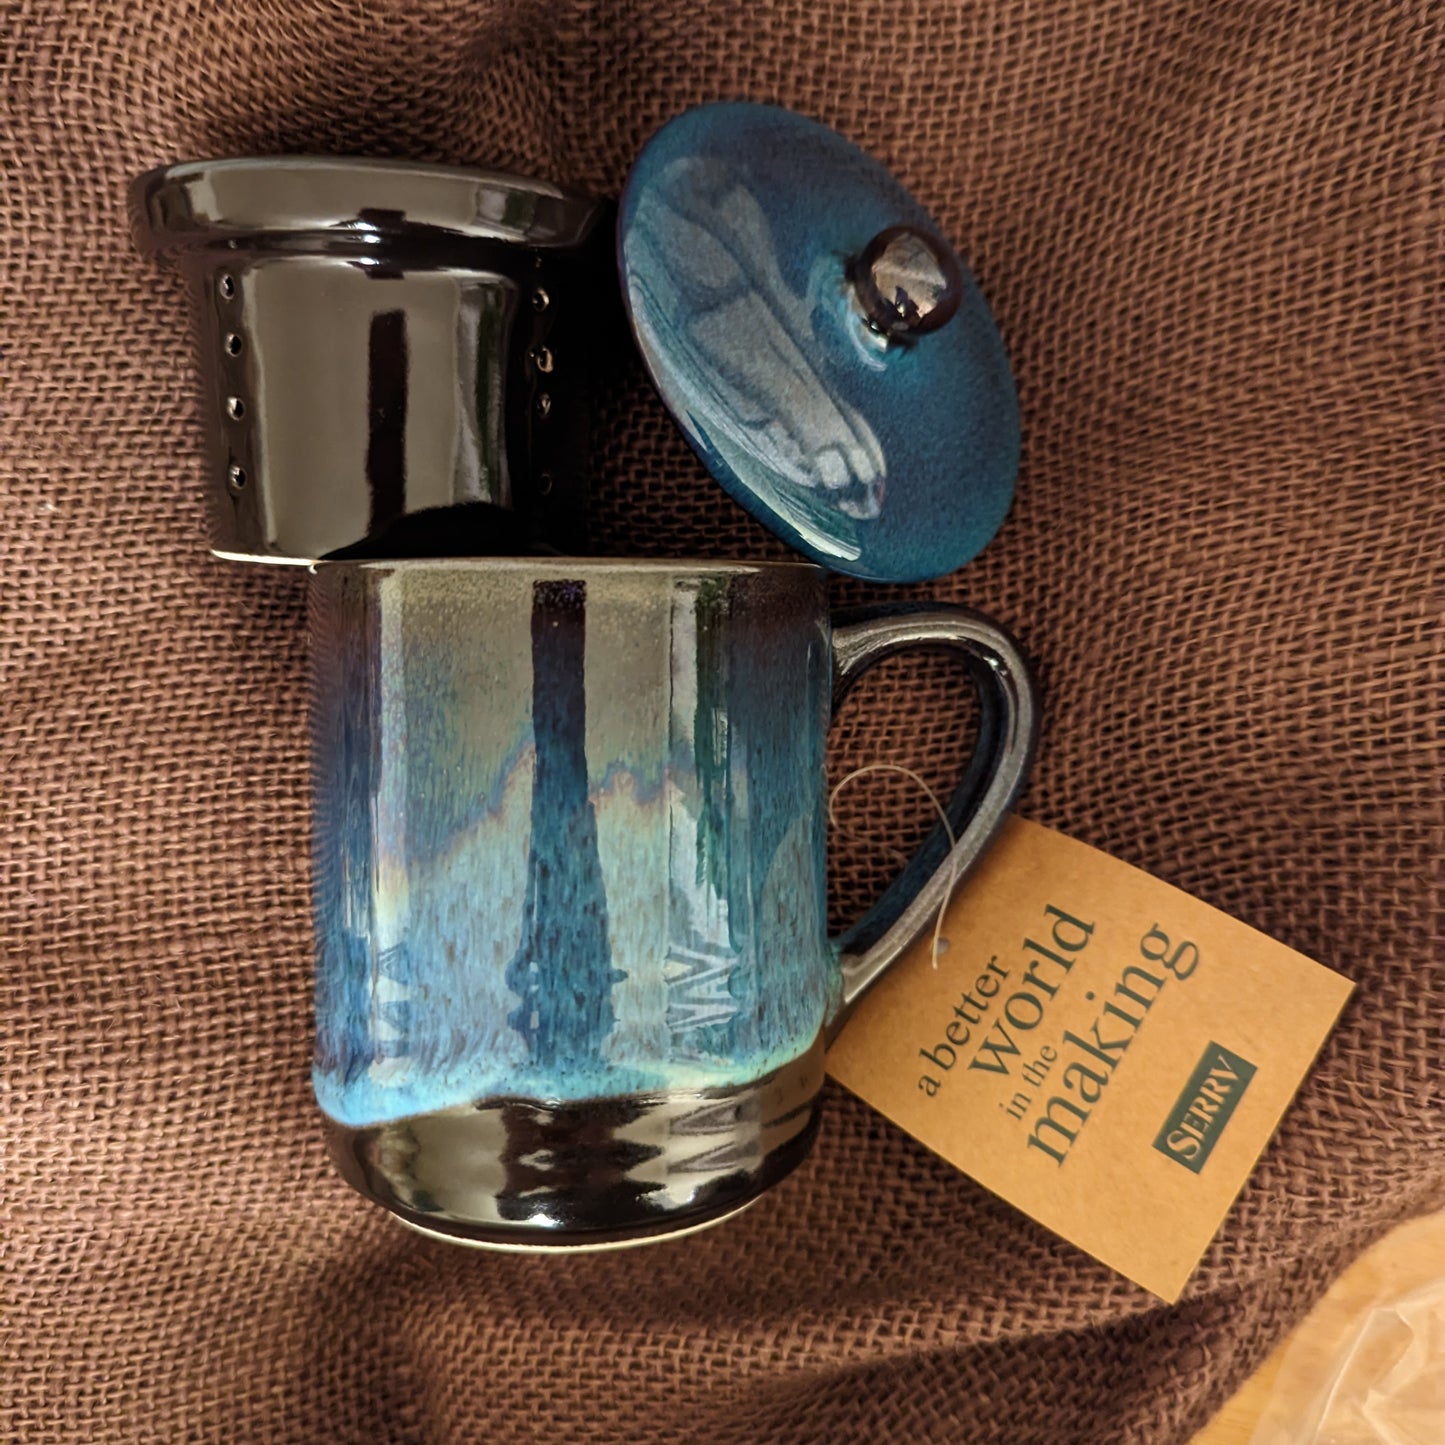 Cold, Flu and Covid Care Mug Gift Collection - Cherry Valley Organics